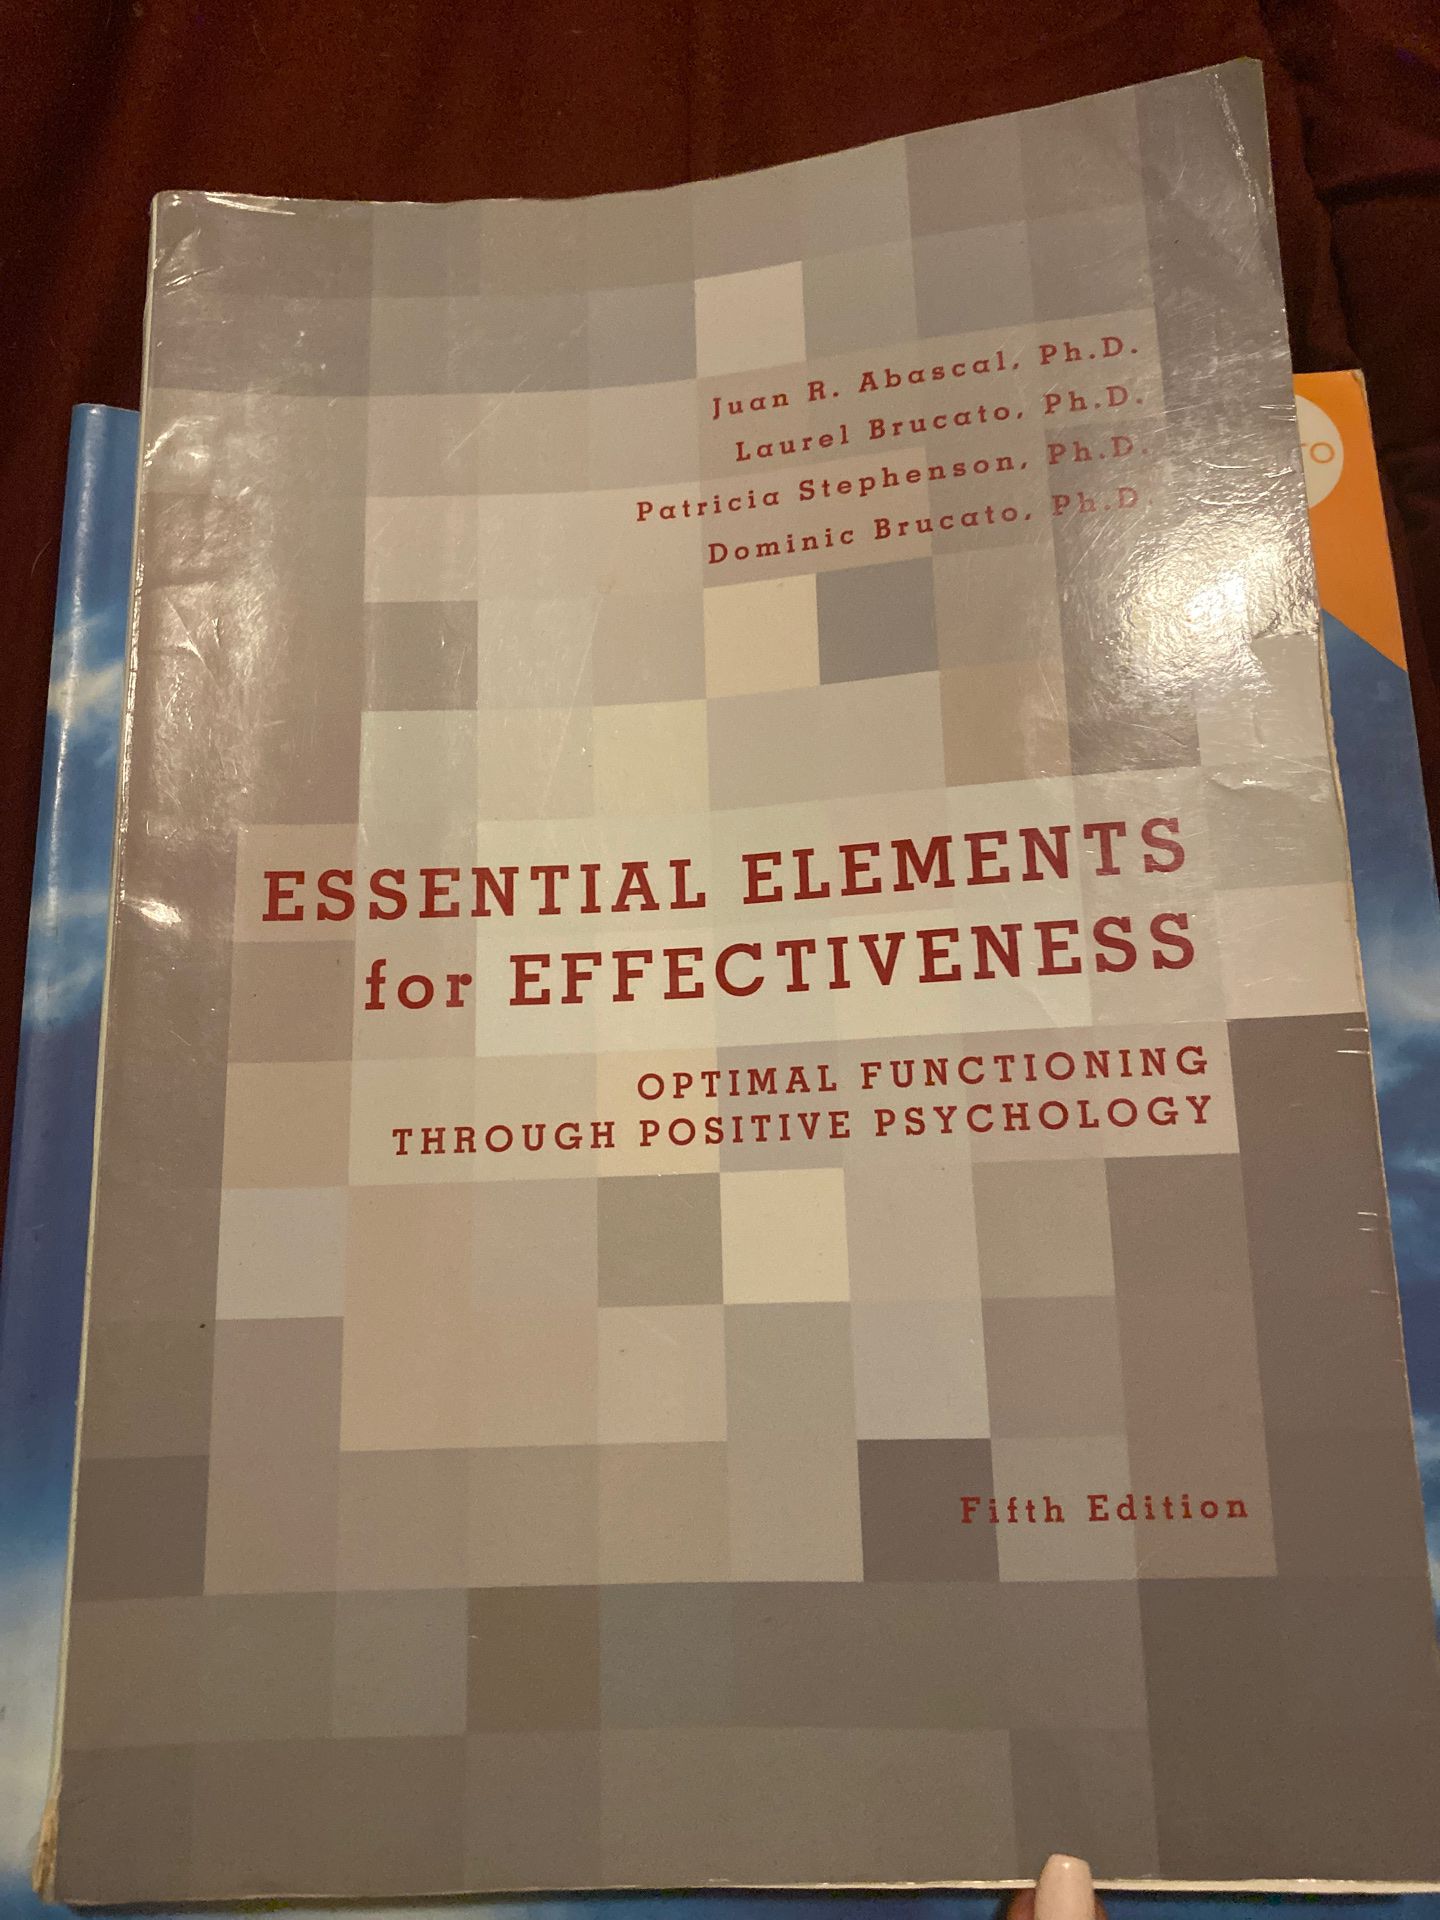 Essential elements for effectiveness 5th edition